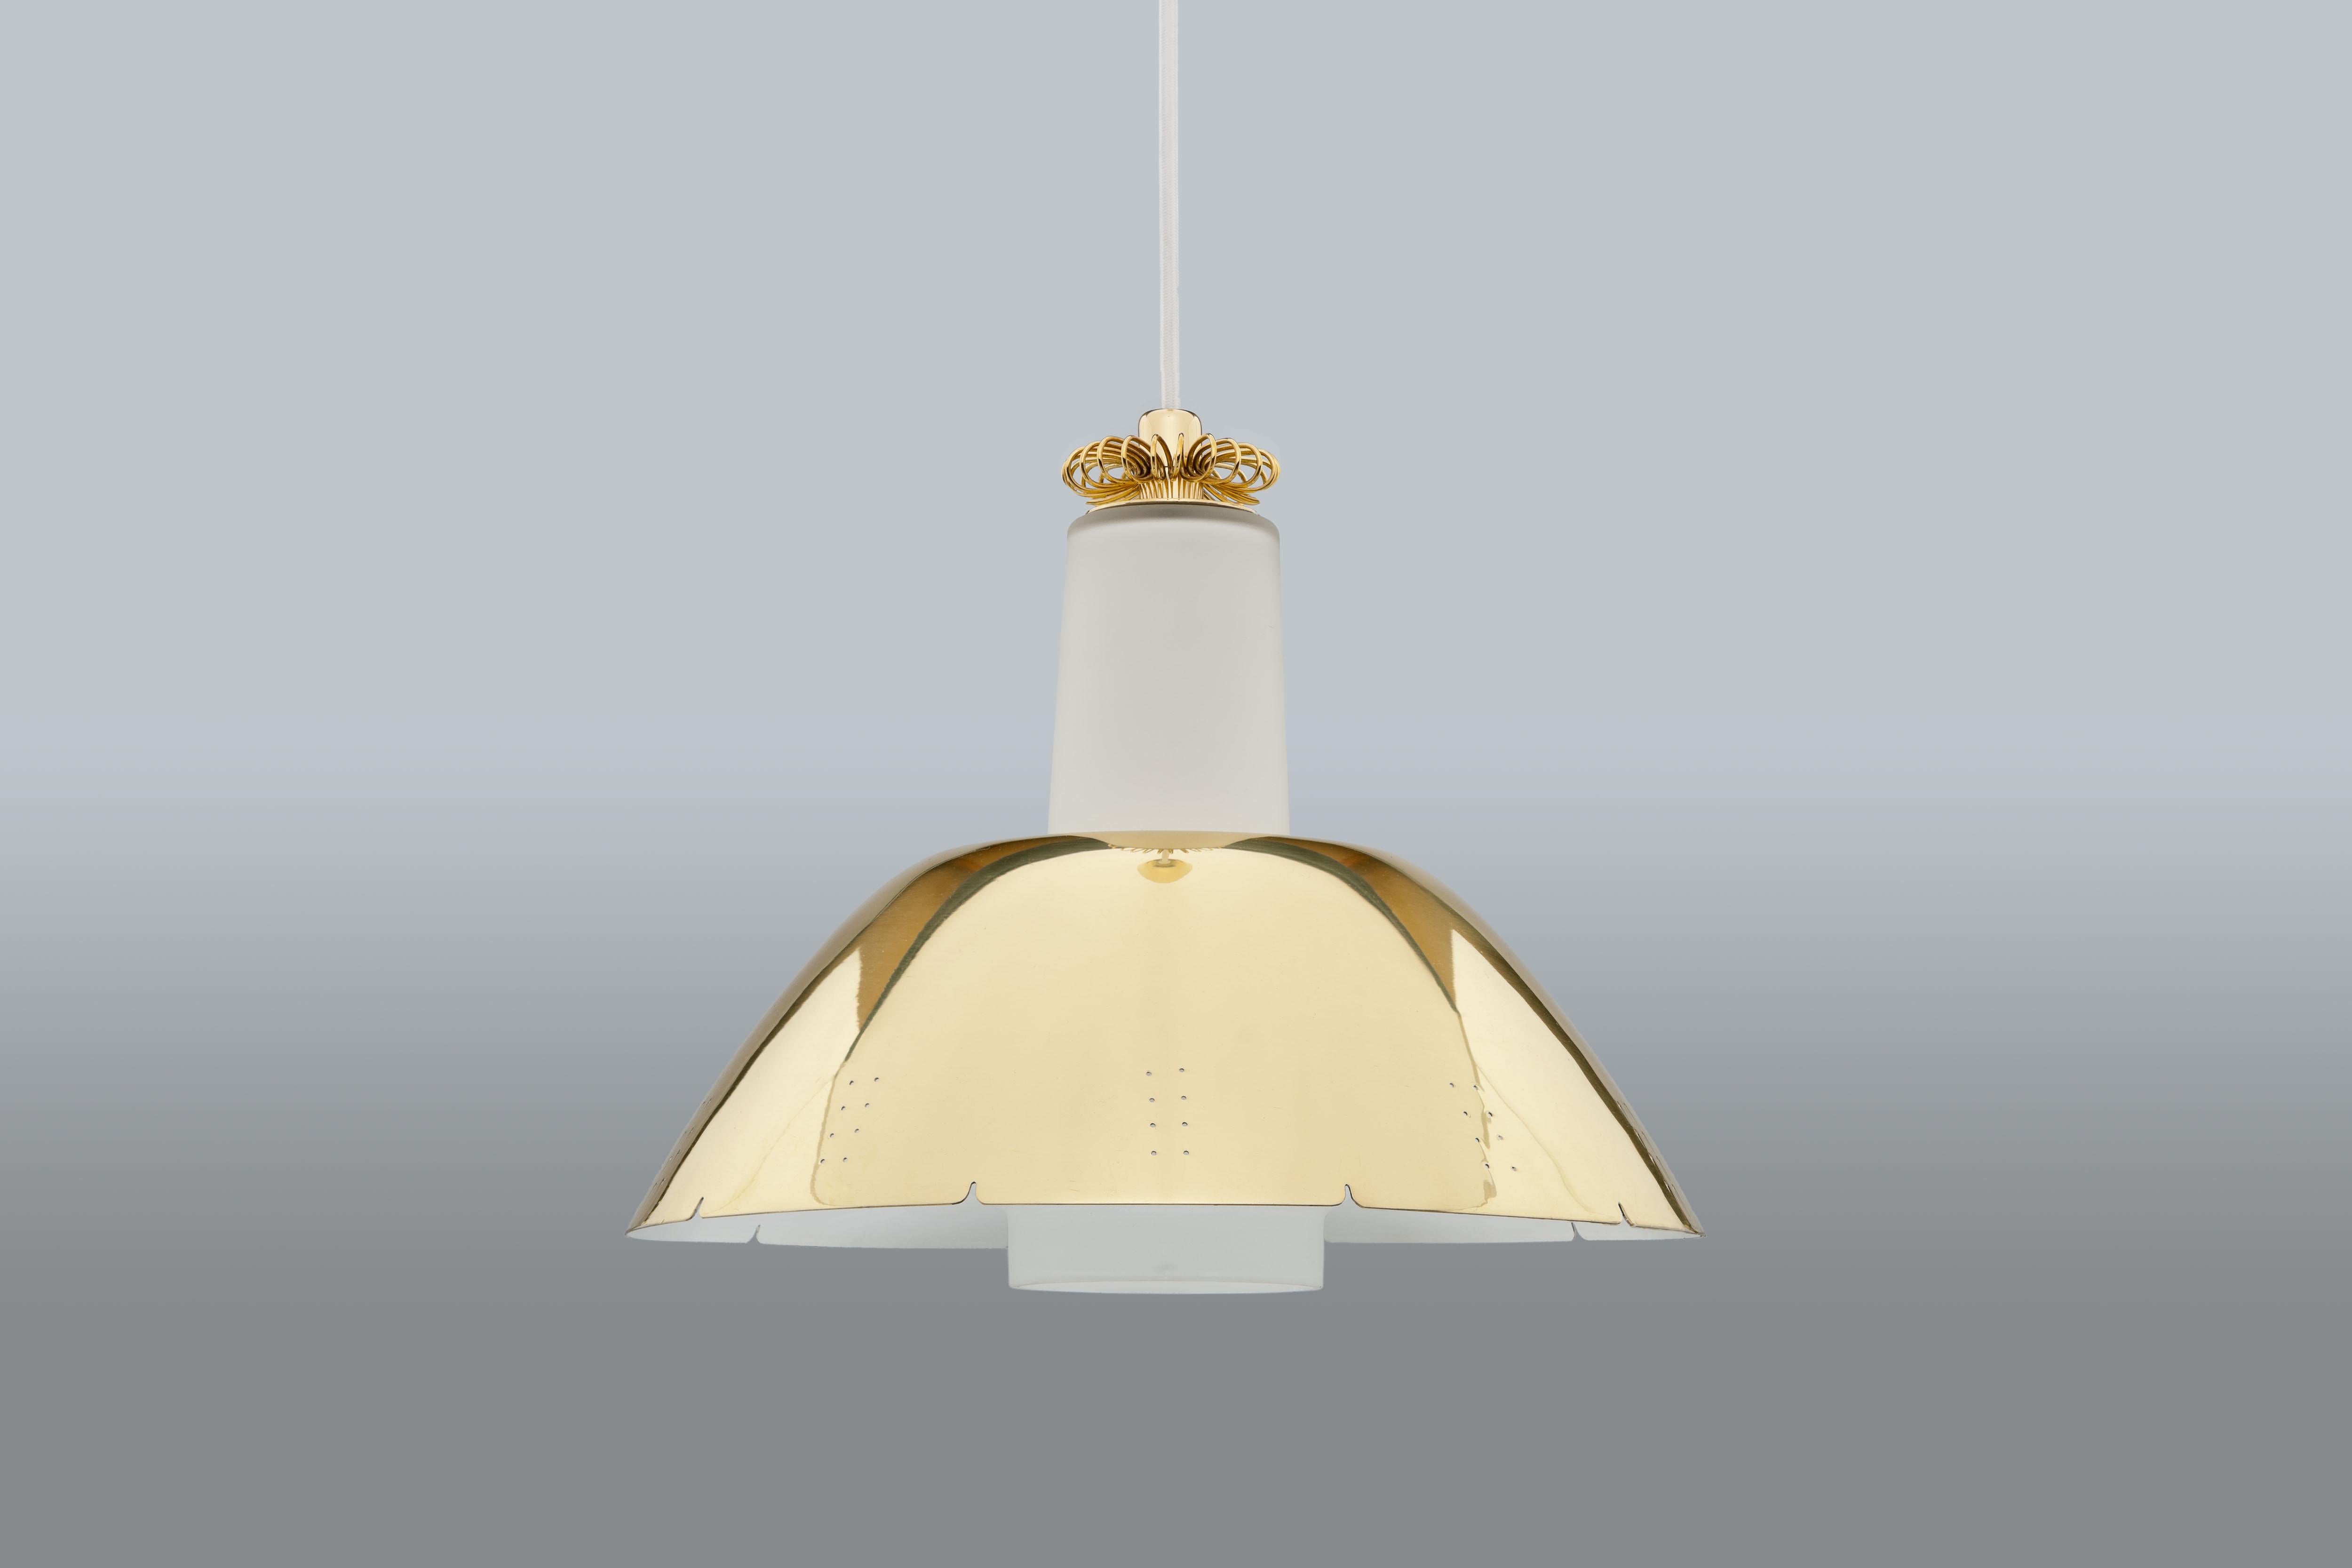 1950's brass and opal glass pendant model K2-20 by Paavo Tynell for Idman Oy Finland
Polished and perforated brass dome shaped shade over mouth blown frosted glass diffuser. 
A beautiful refined brass rosette flower detail is featuring on top of